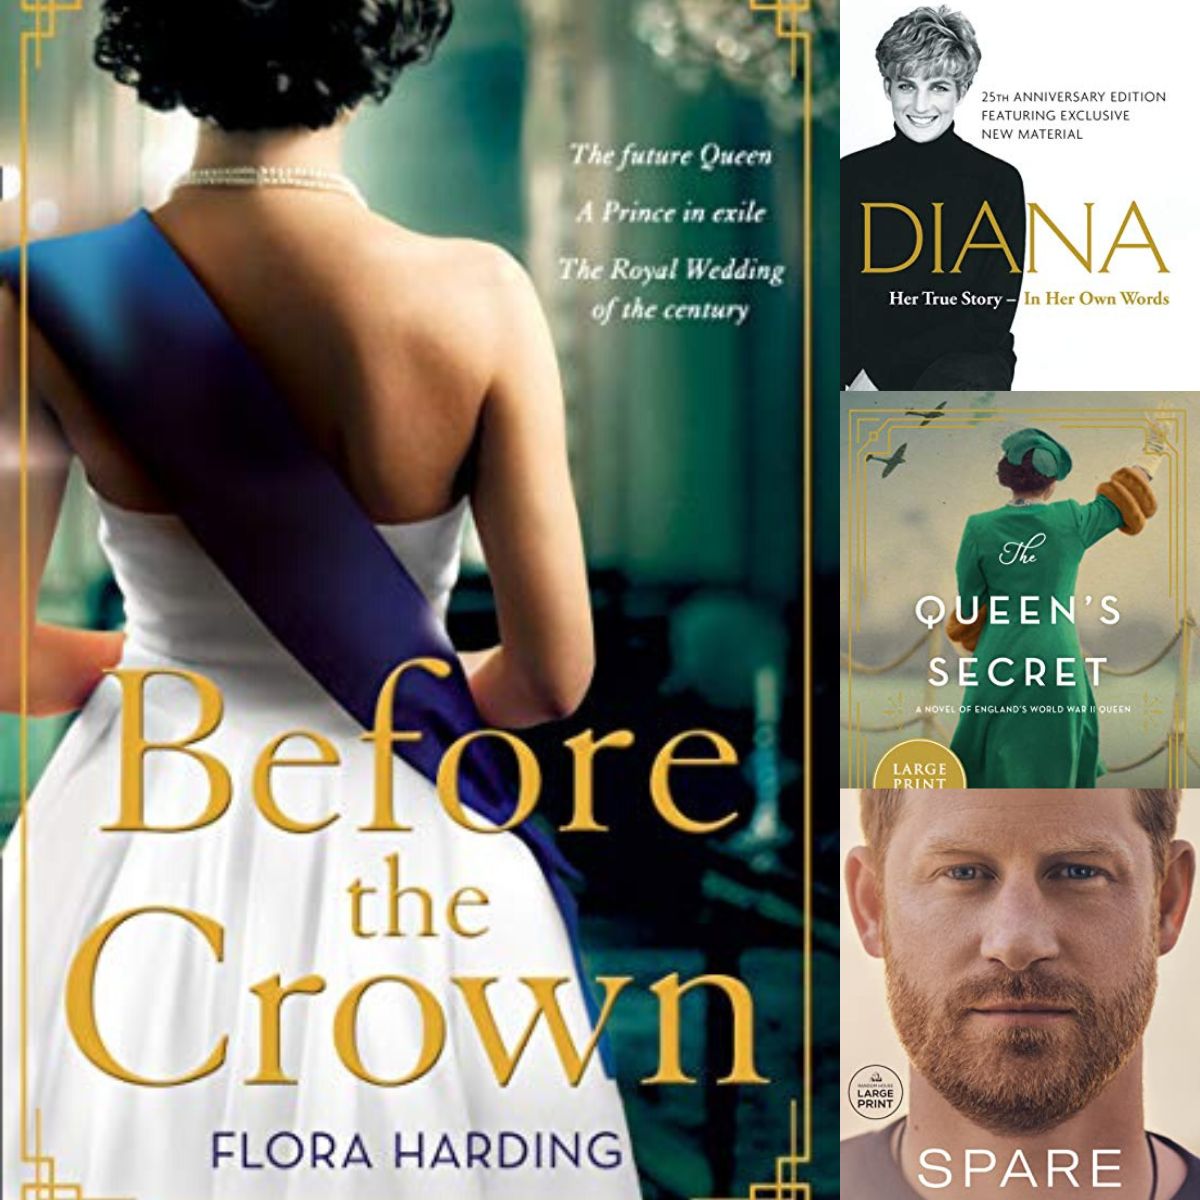 A photo collage shows historical fiction books about the royal family along with modern biographies of Prince Harry and Princess Diana.